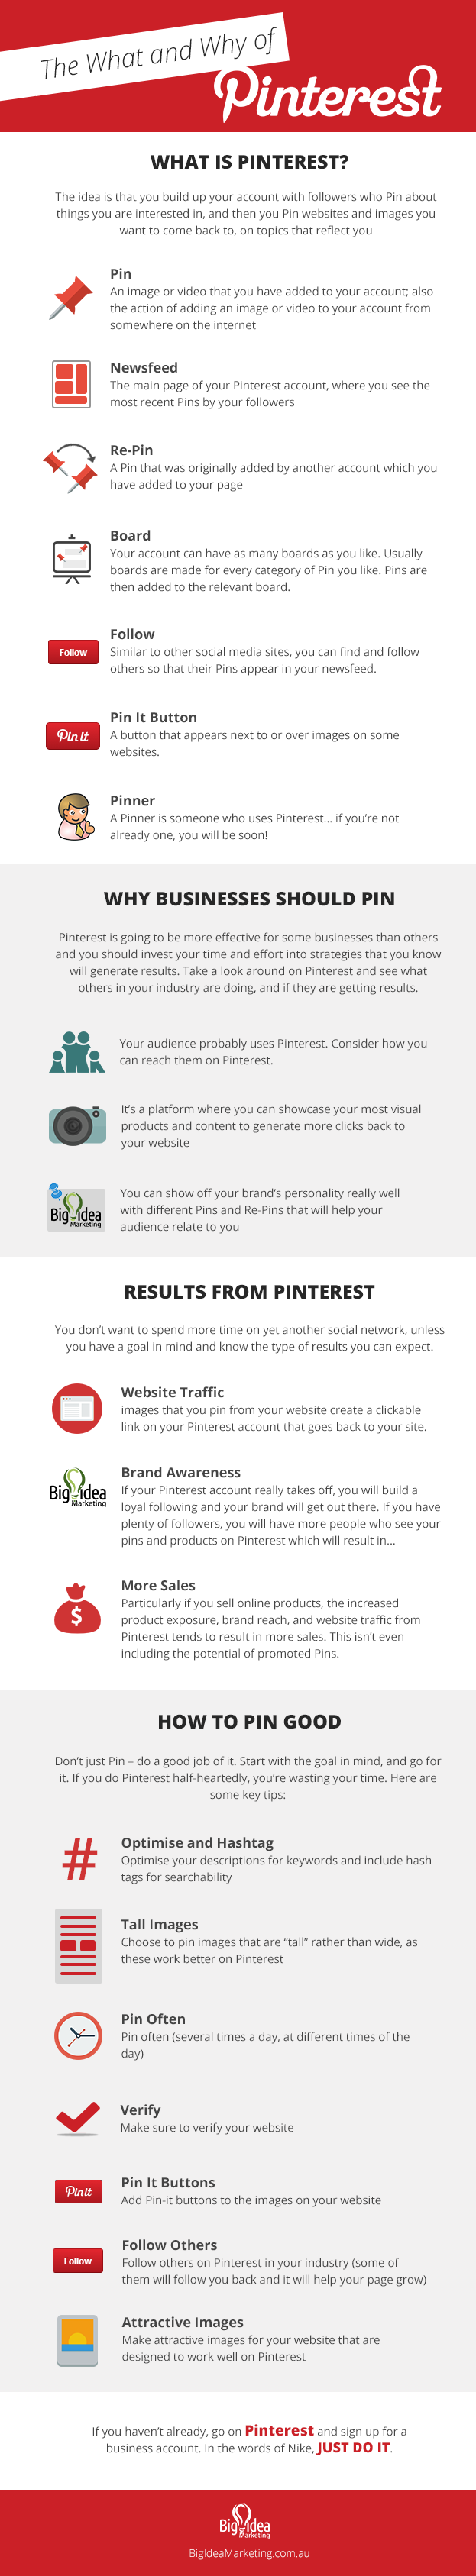 The What and Why of Pinterest for Business - #infographic